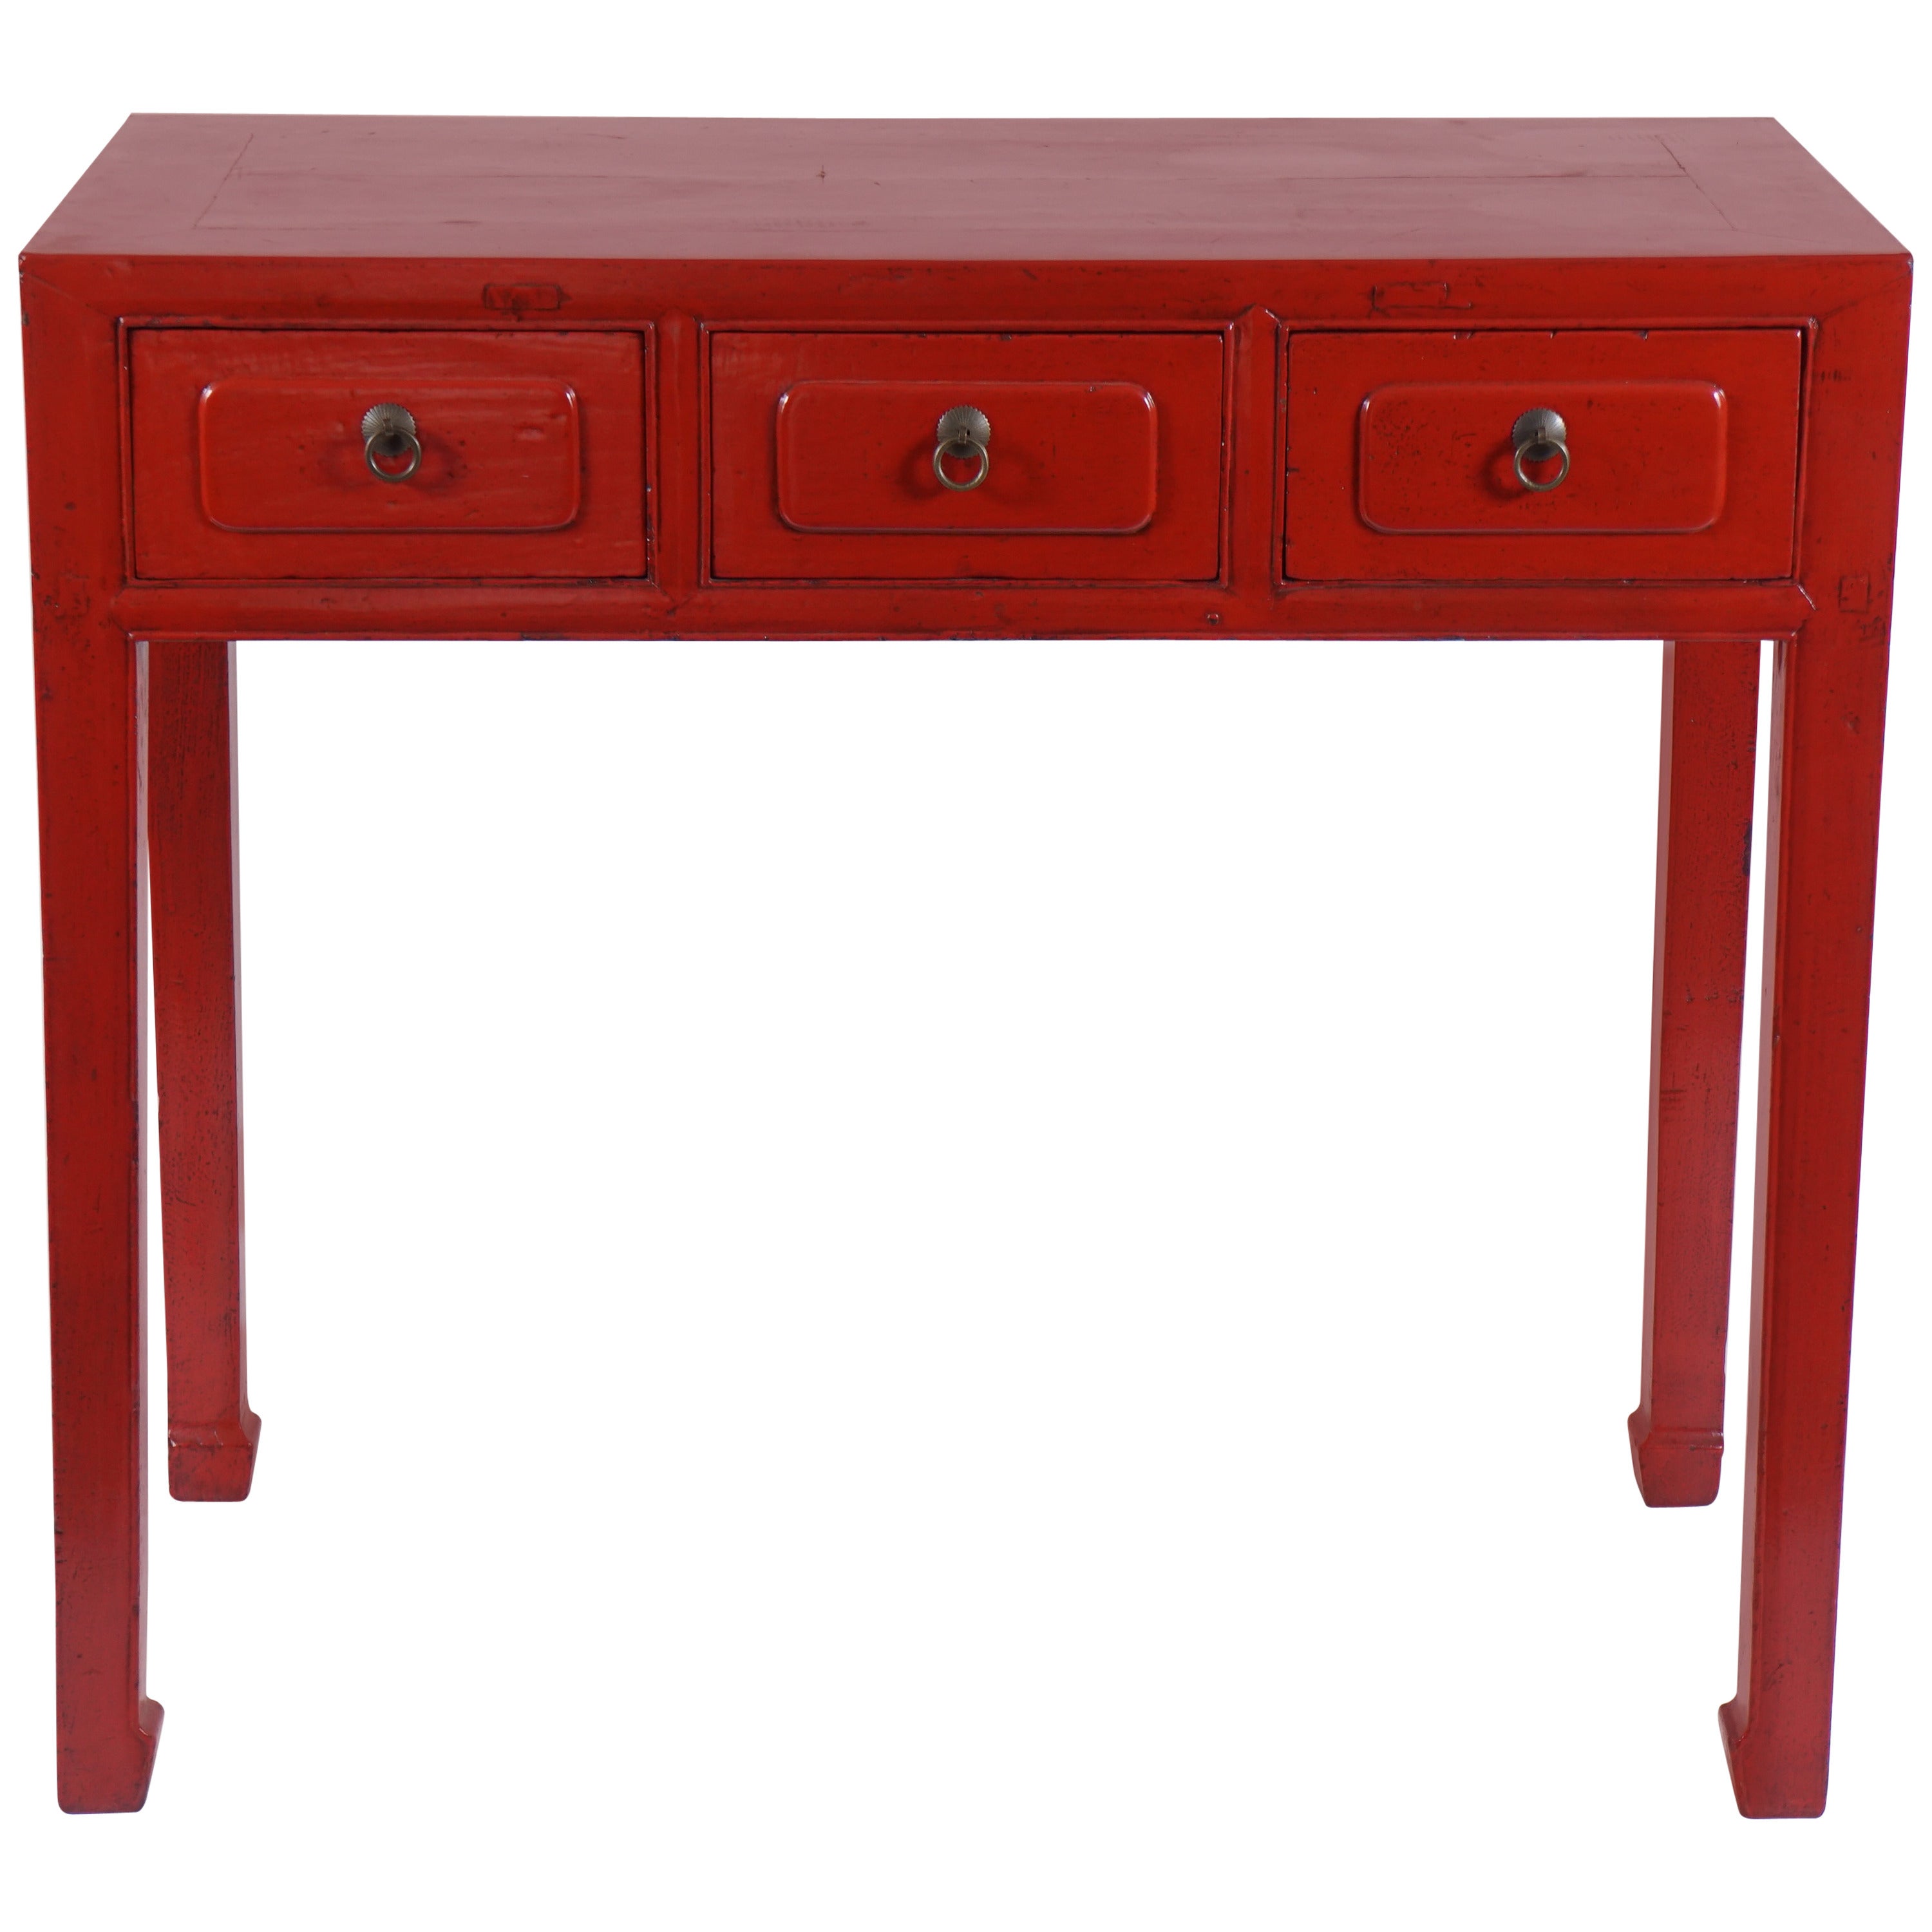 "Chinese" Red Three-Drawer Console For Sale